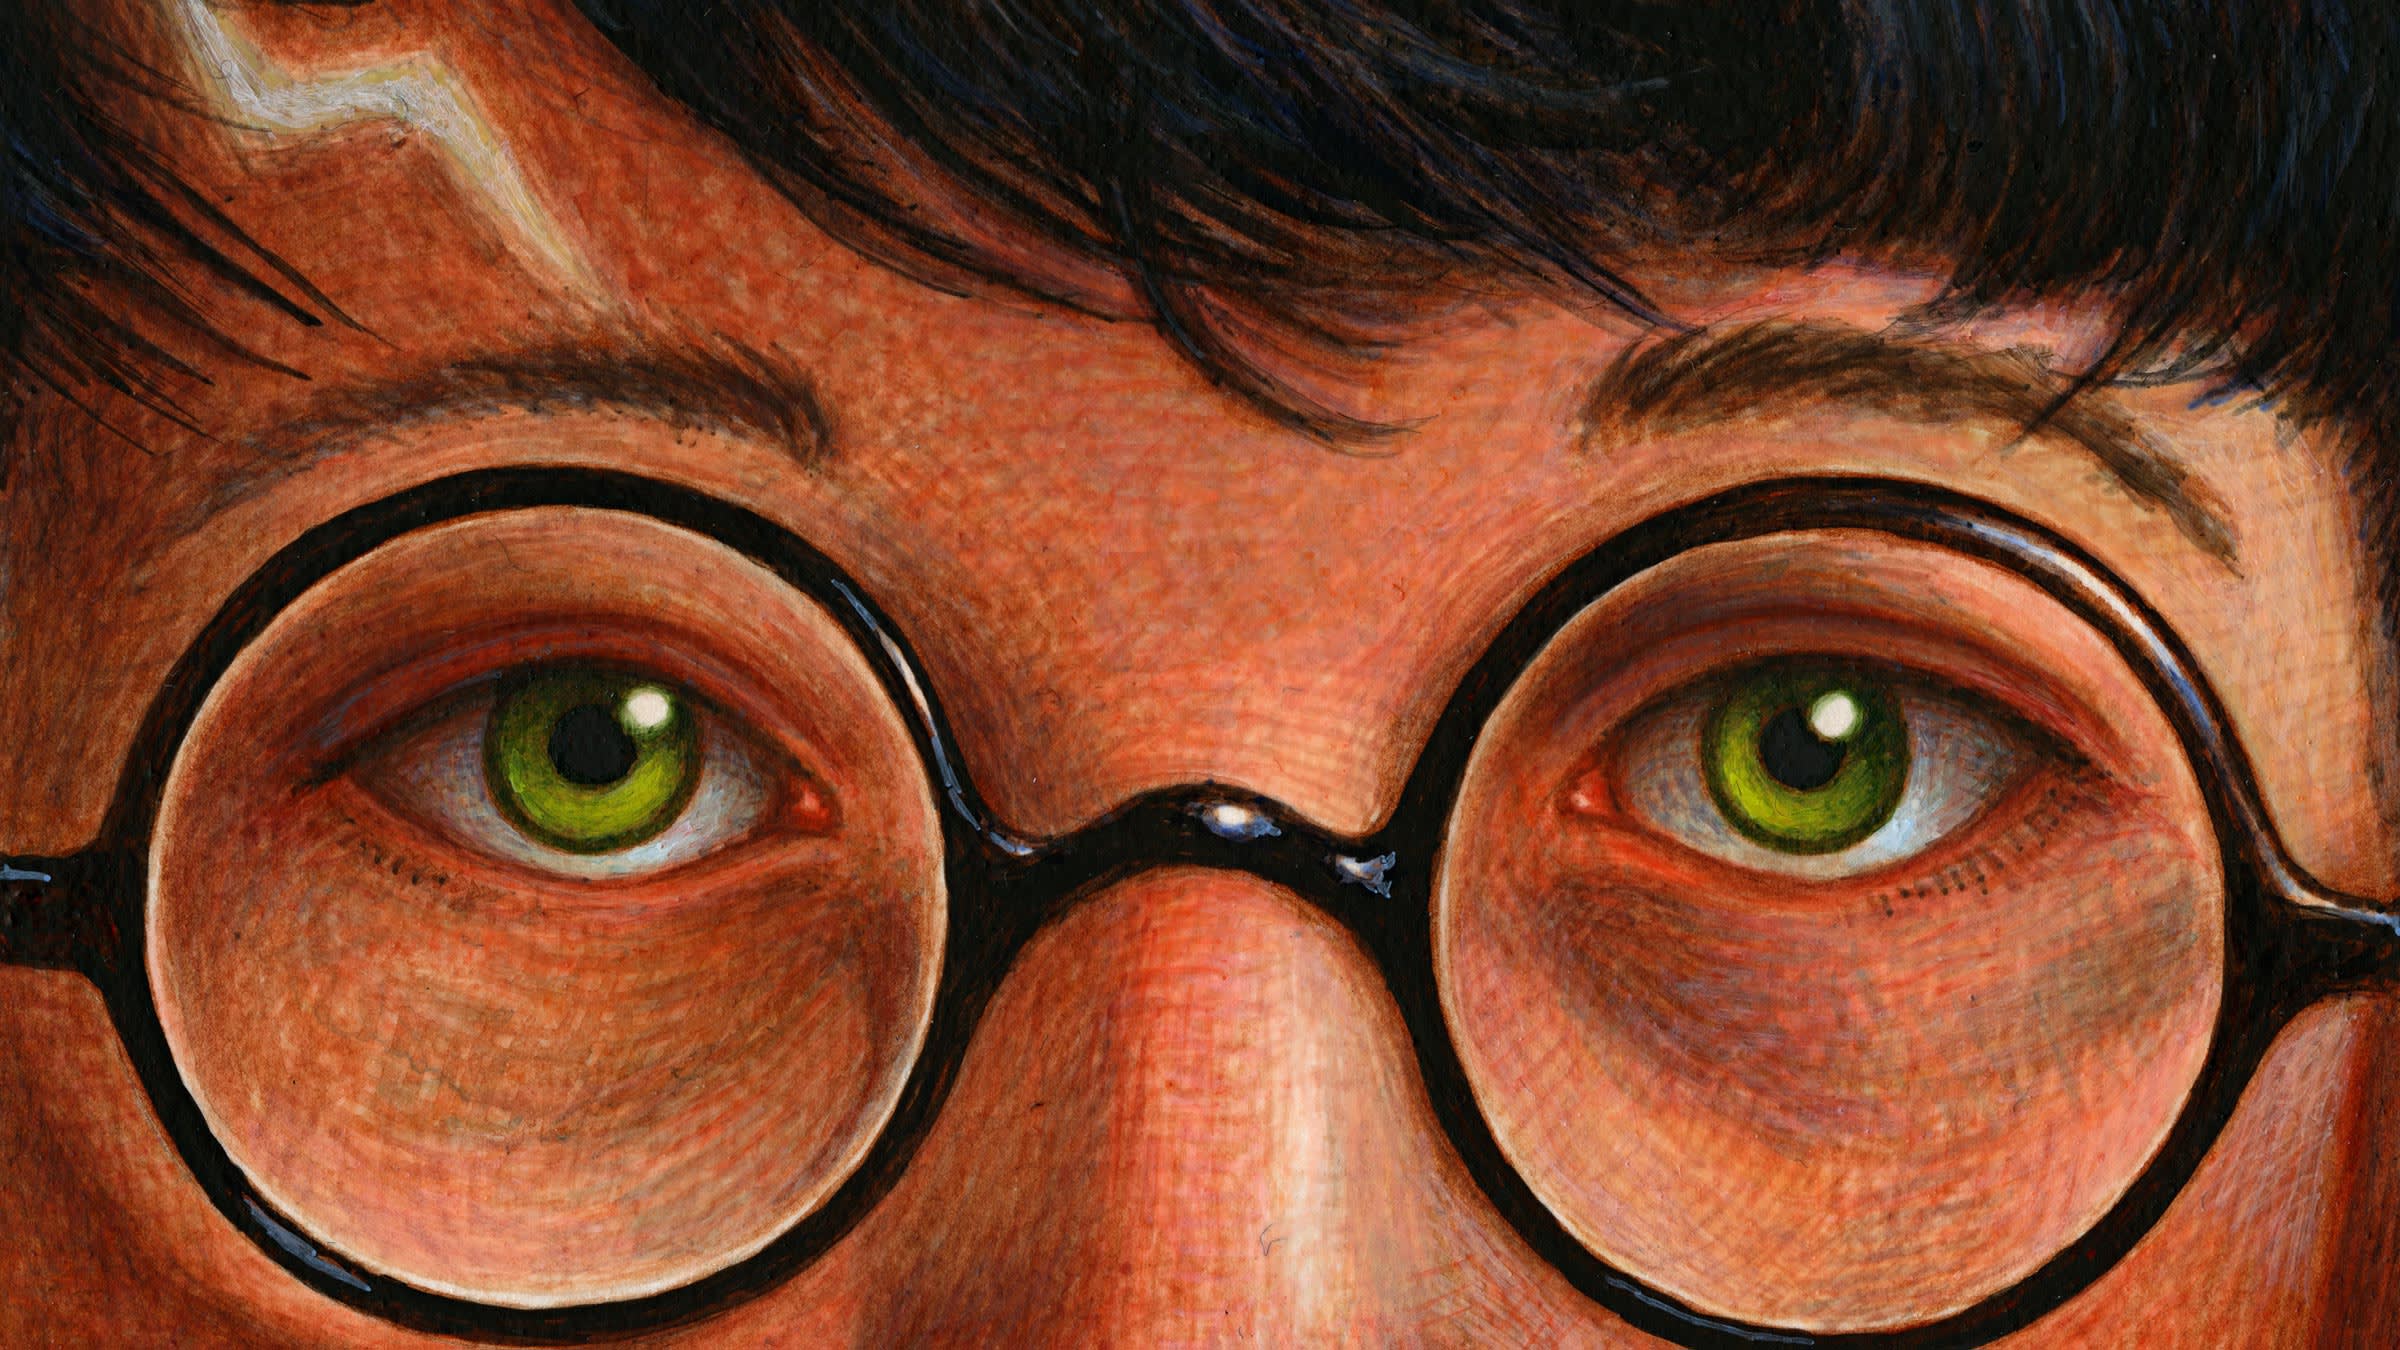 Illustration of Harry Potter's eyes, by Brian Selznick